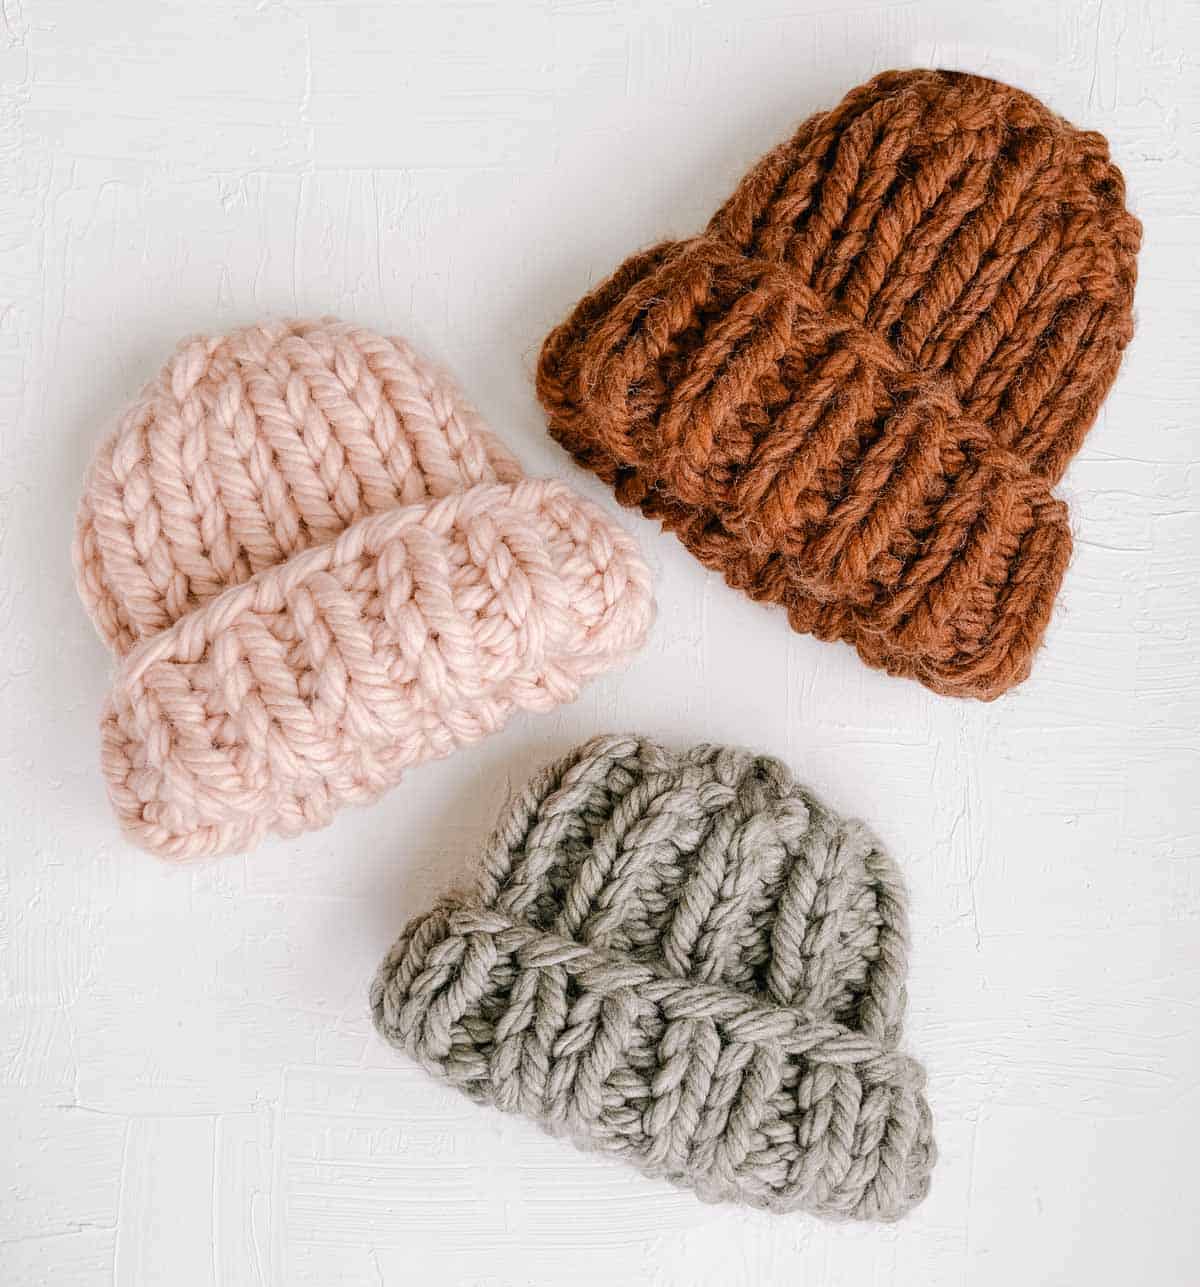 Three bulky knit beanies next to each other on a white background.